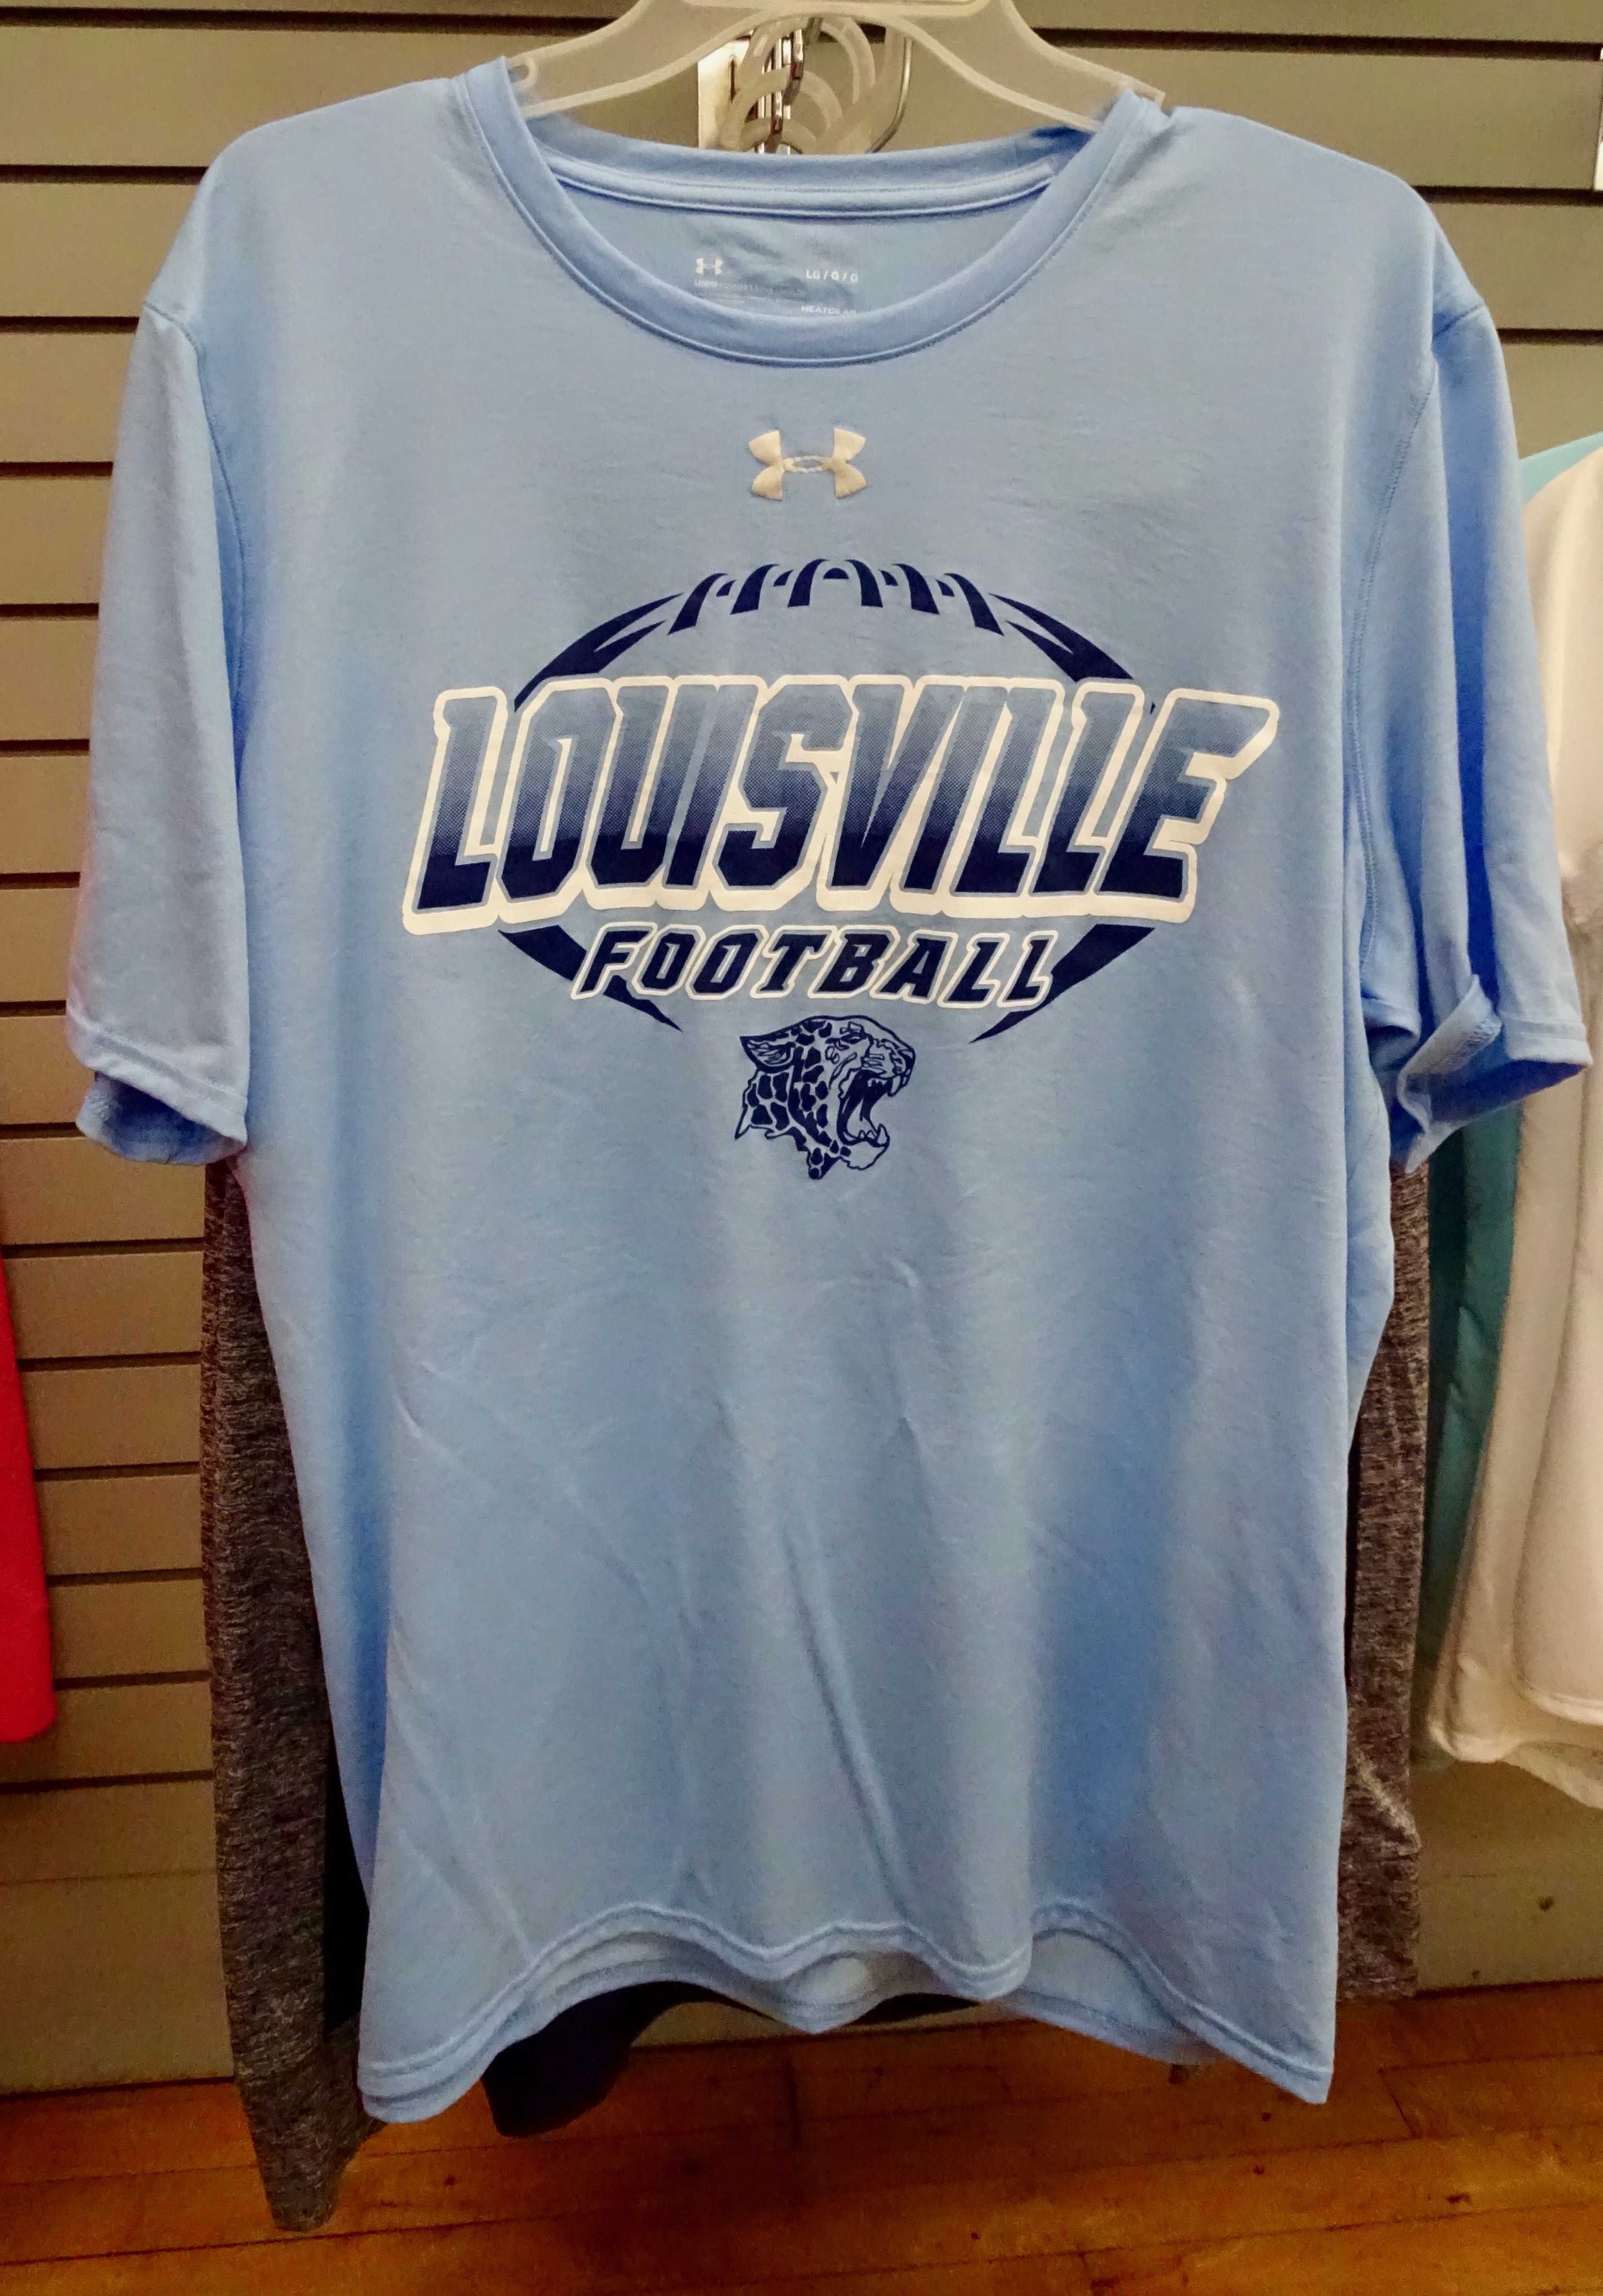 New Leopards Apparel in at Beatty's Sports